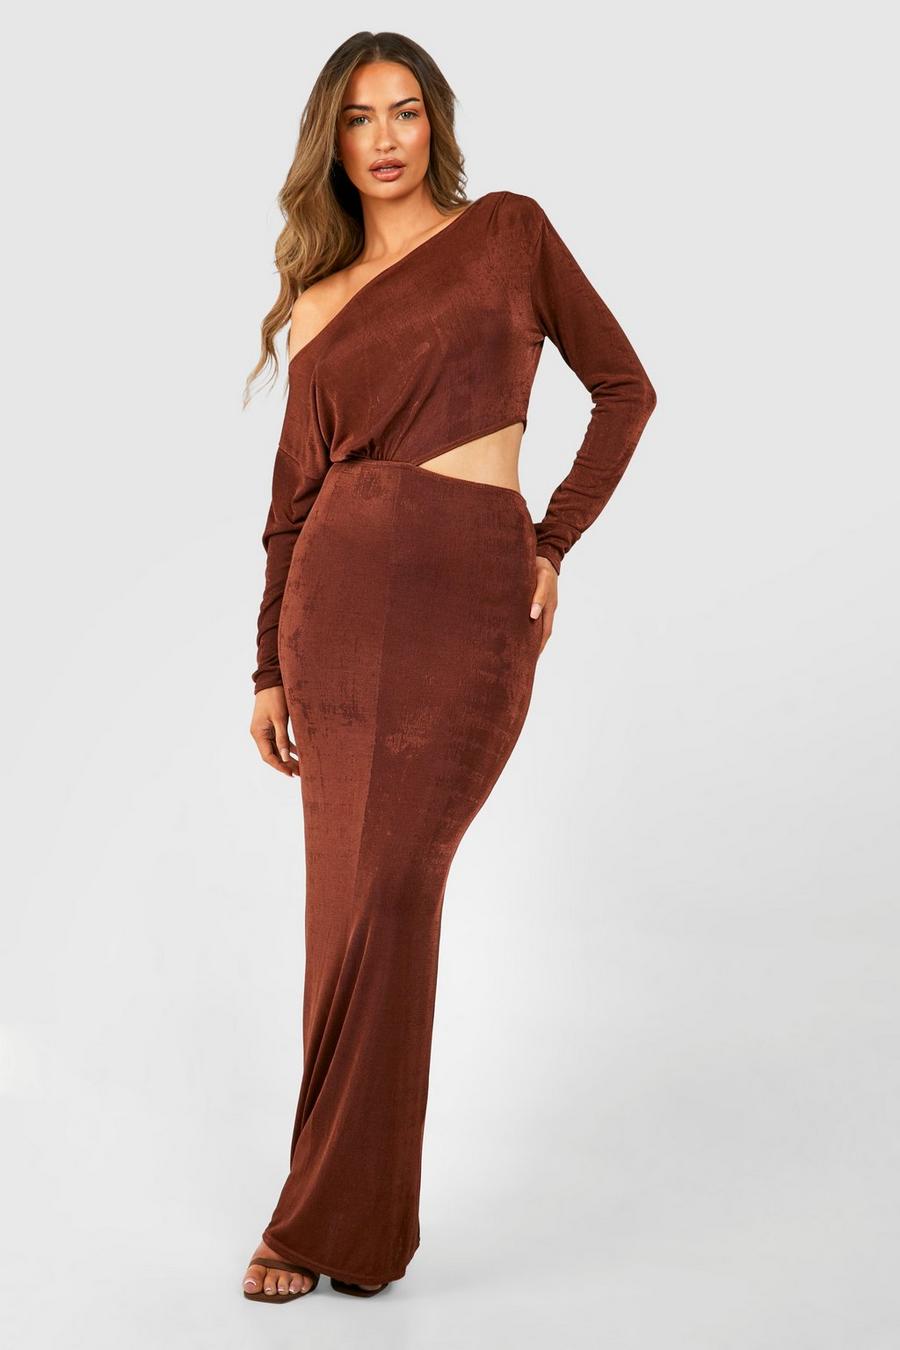 Chocolate Slash Neck Ruched Acetate Slinky Cut Out Maxi Dress